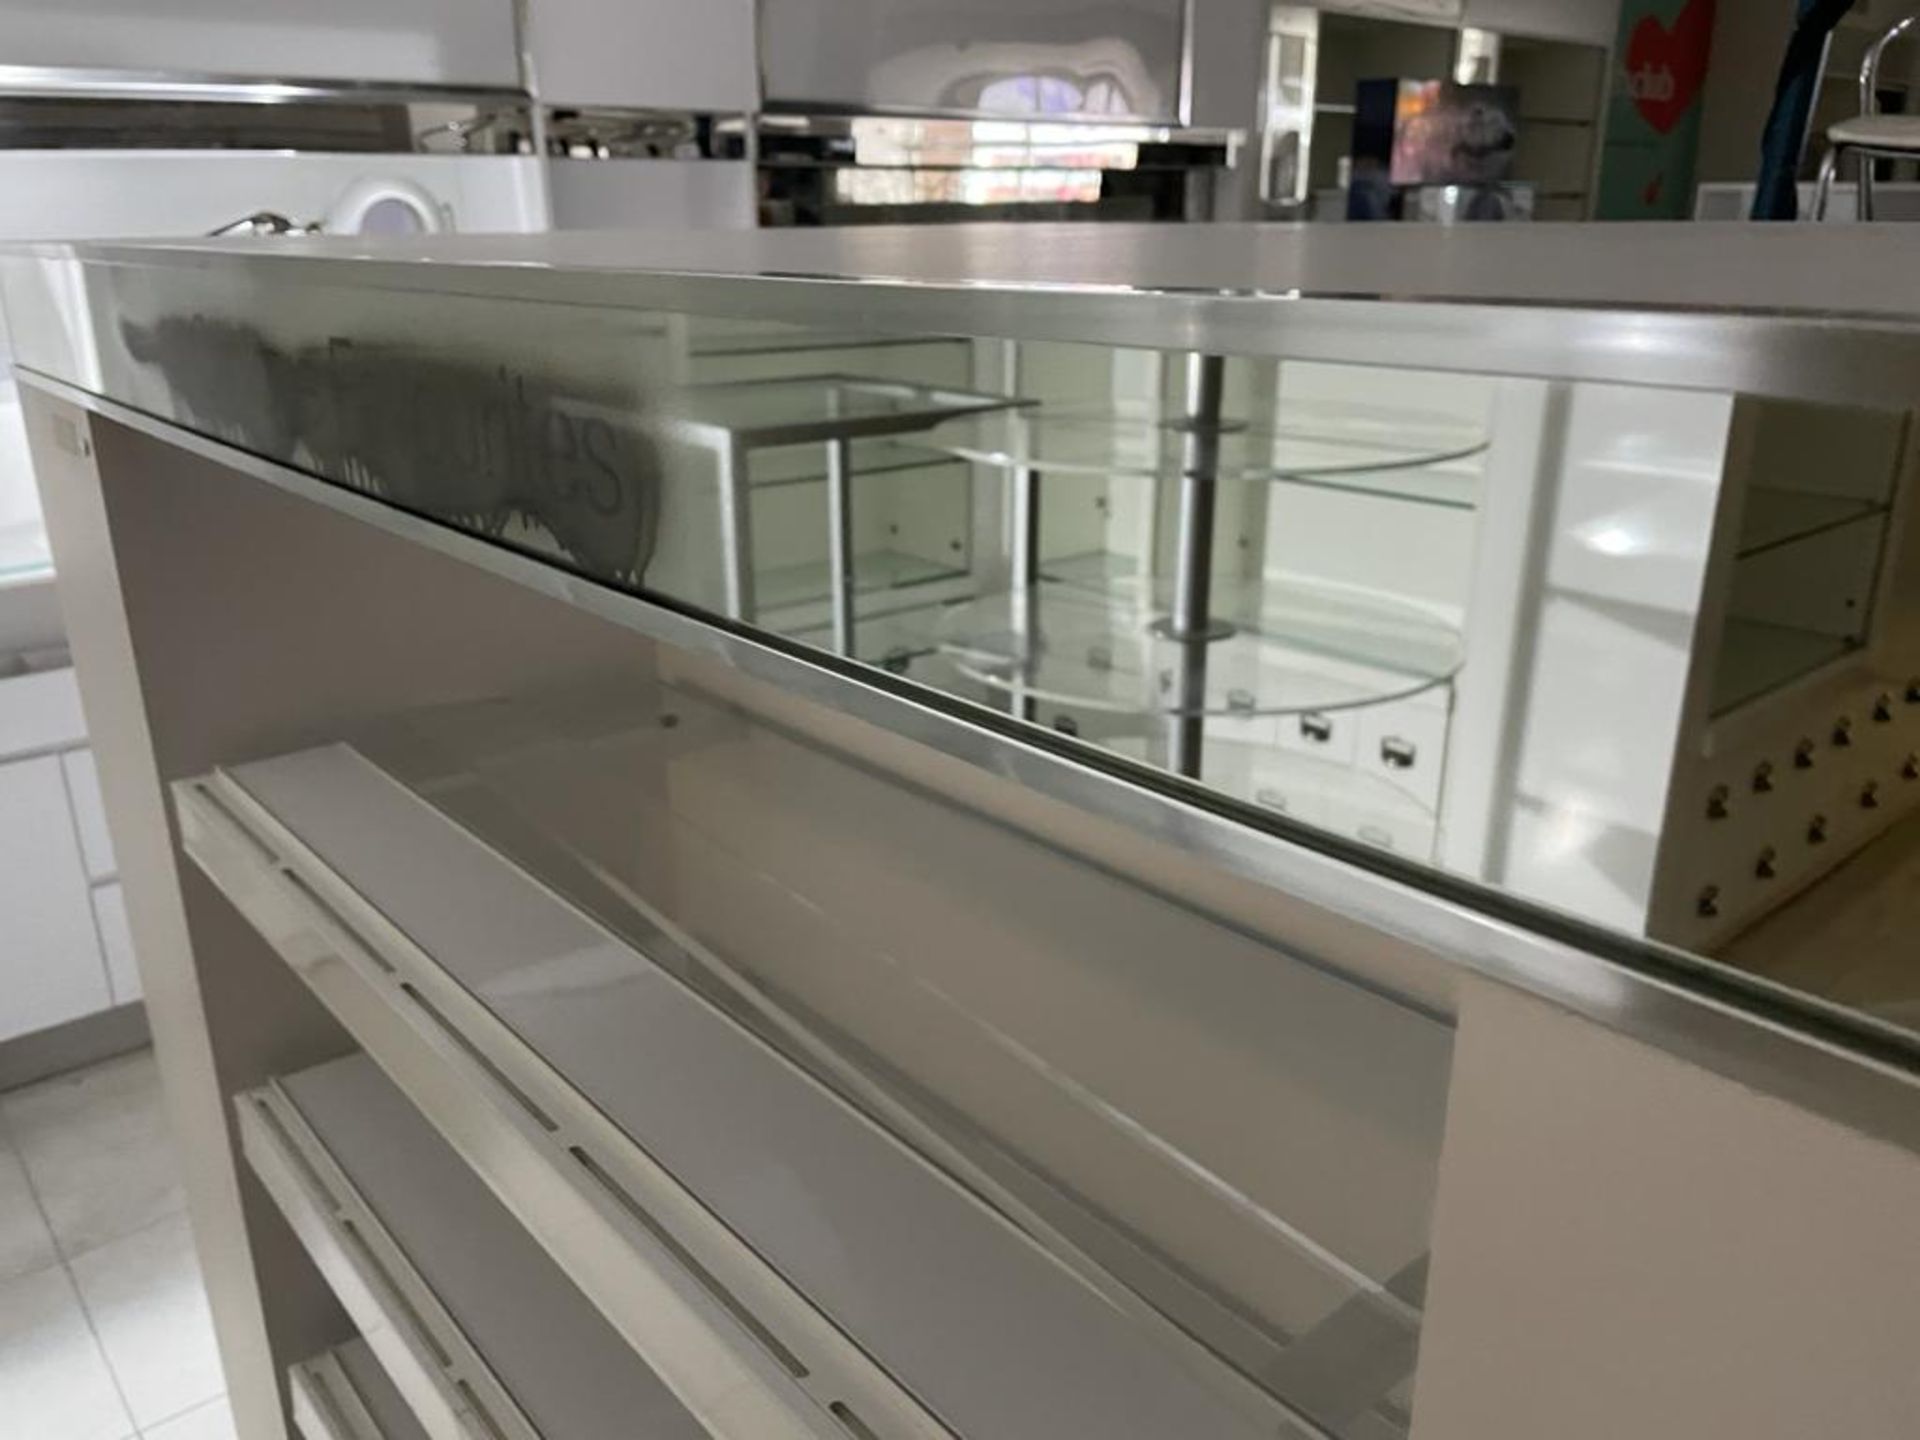 1 x Retail Four Sided Display Island With Shelves, Storage Drawers and Mirrored Panels - Size H150 x - Image 2 of 10